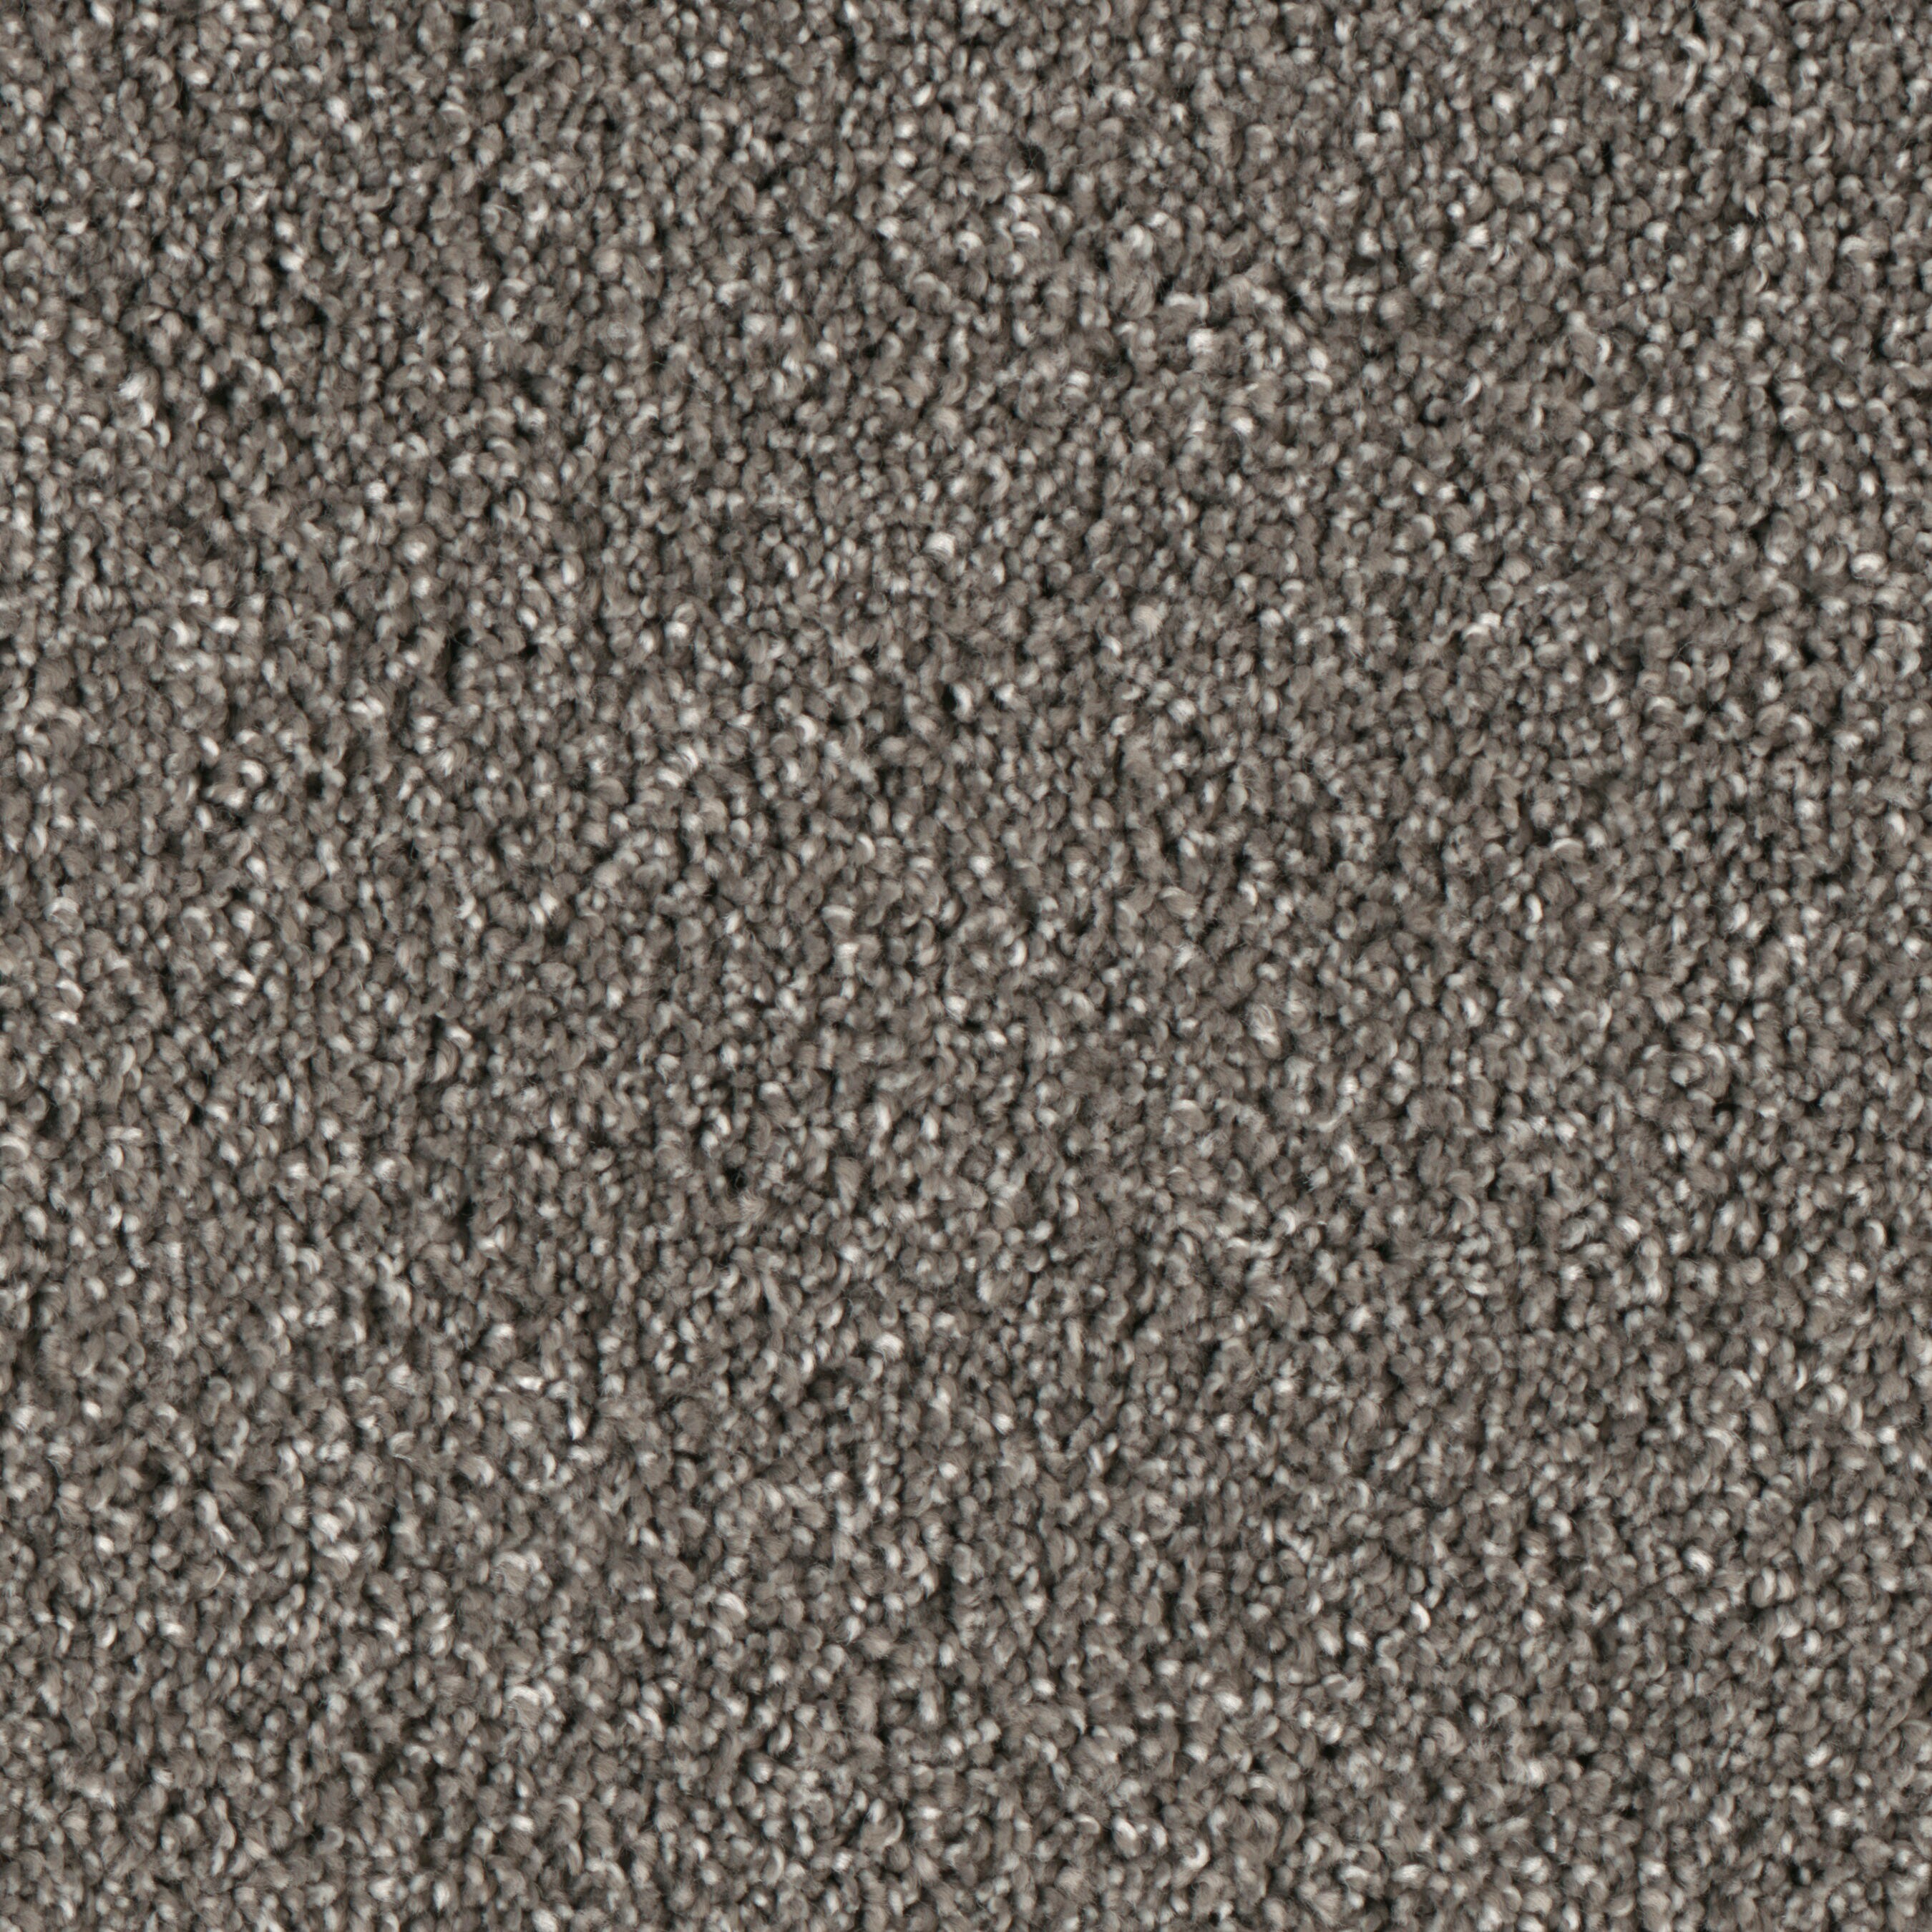 (Sample) Lenox Park Fountain Textured Indoor Carpet | - STAINMASTER S9255-956-S